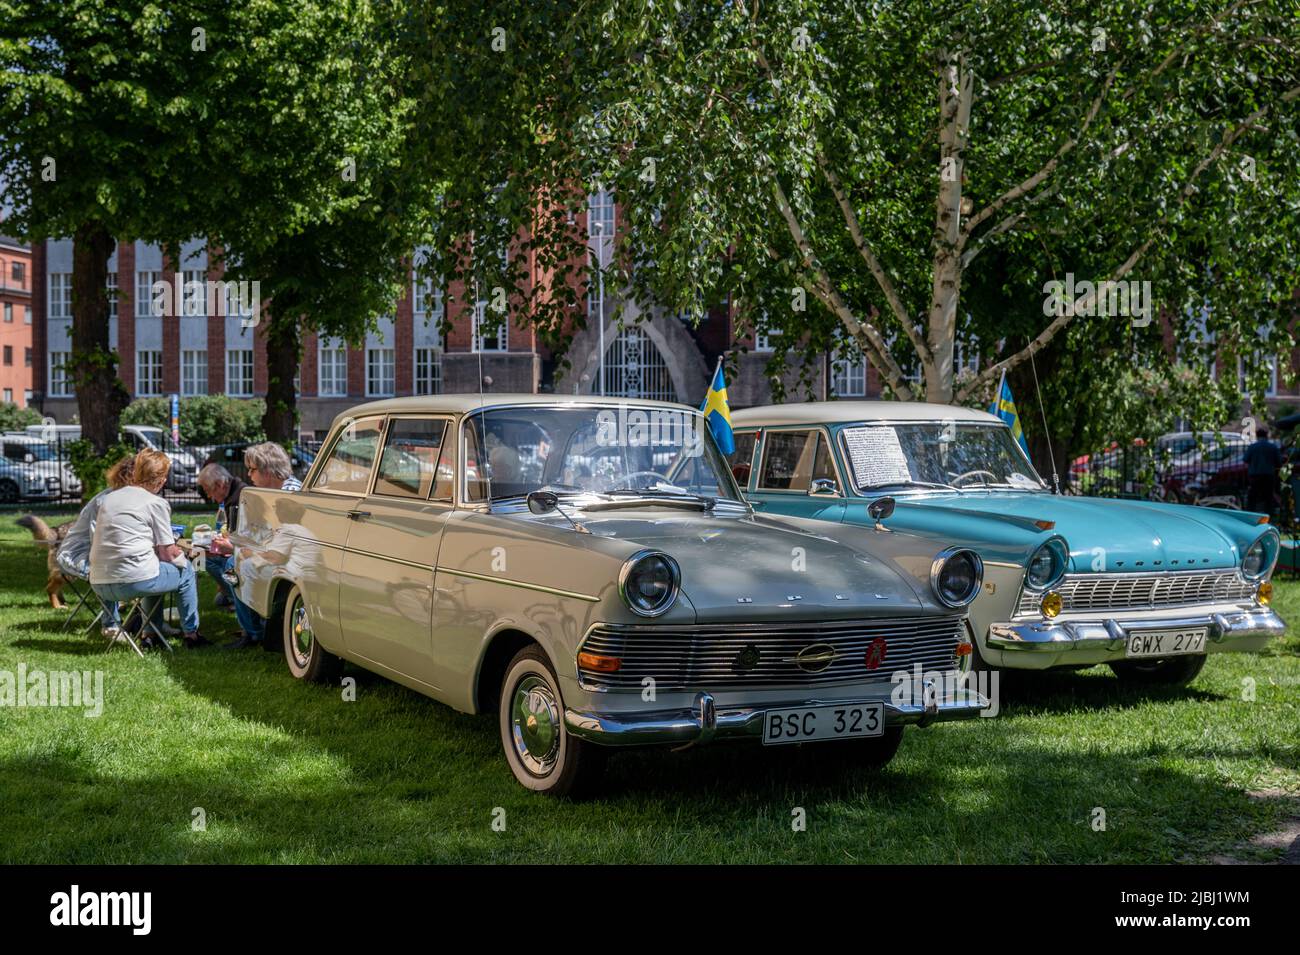 Swedish National day celebration in the Olai Park of Norrkoping on June 6, 2022. Stock Photo